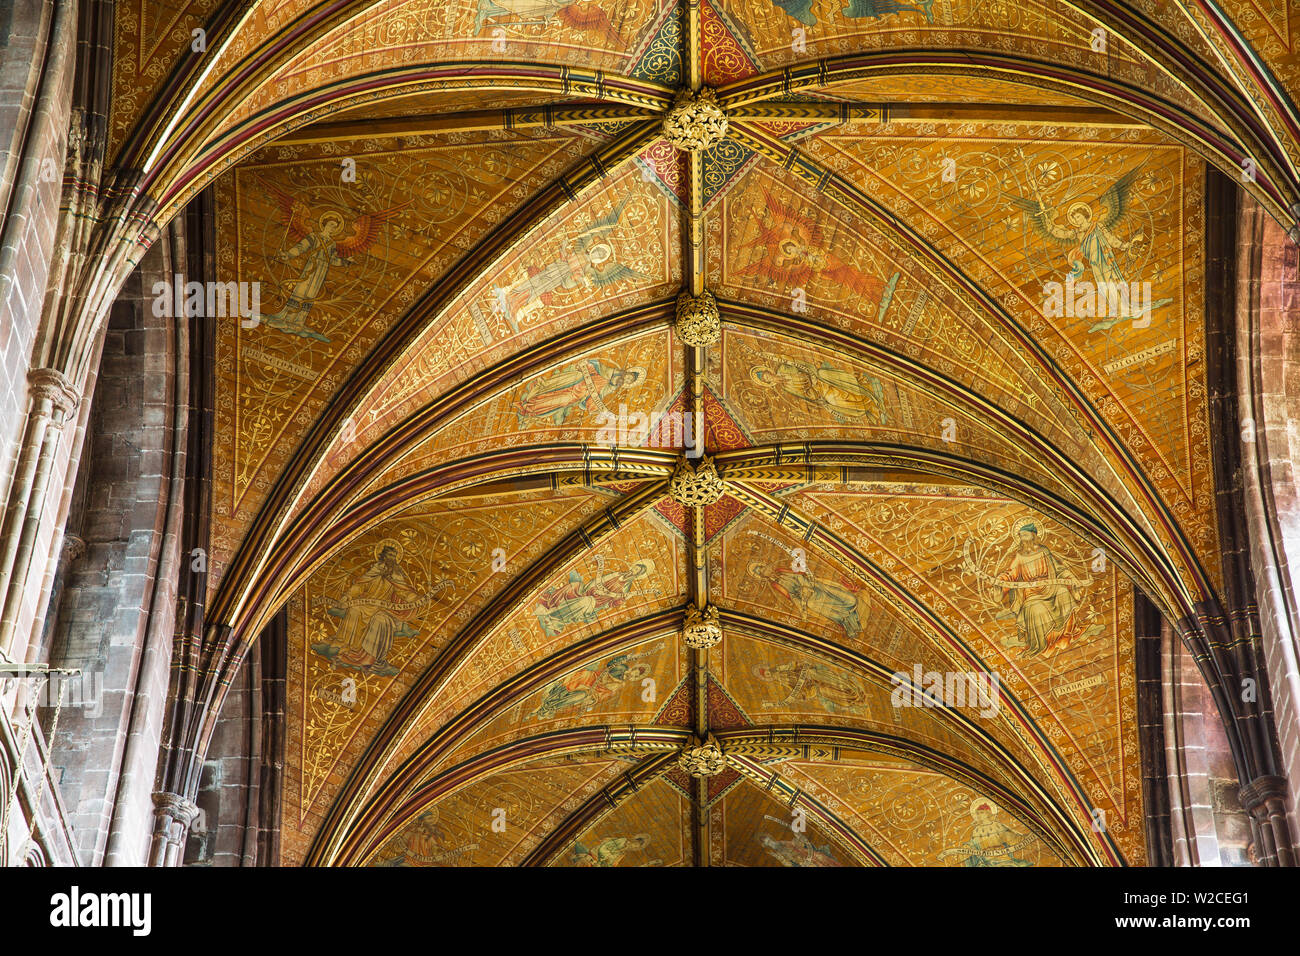 United Kingdom, England, Cheshire, Chester, Chester Cathedral ceiling Stock Photo